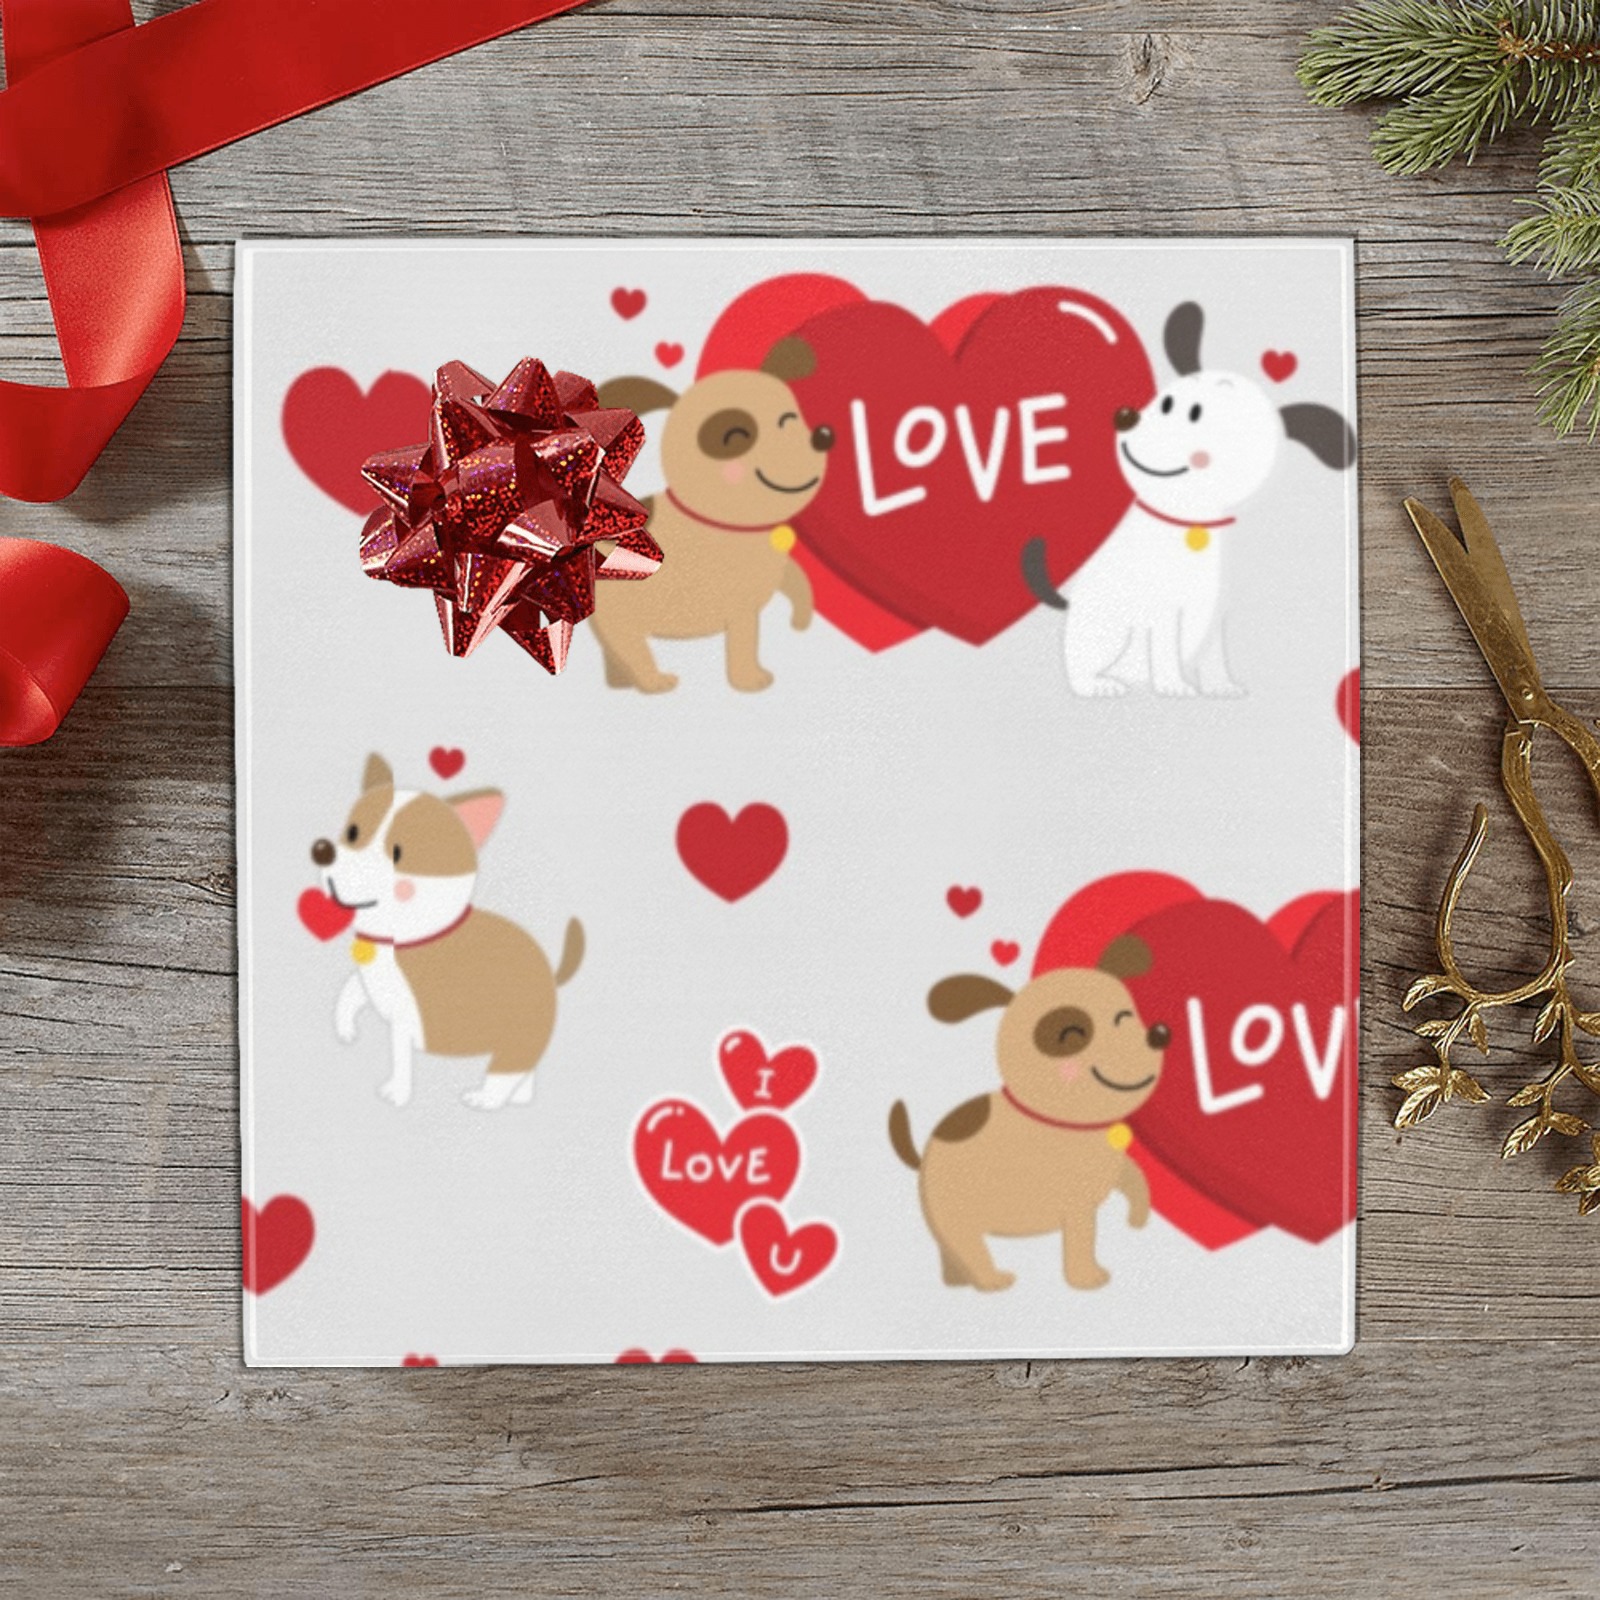 Puppy Love Pattern Gift Wrapping Paper 58"x 23" (1 Roll)